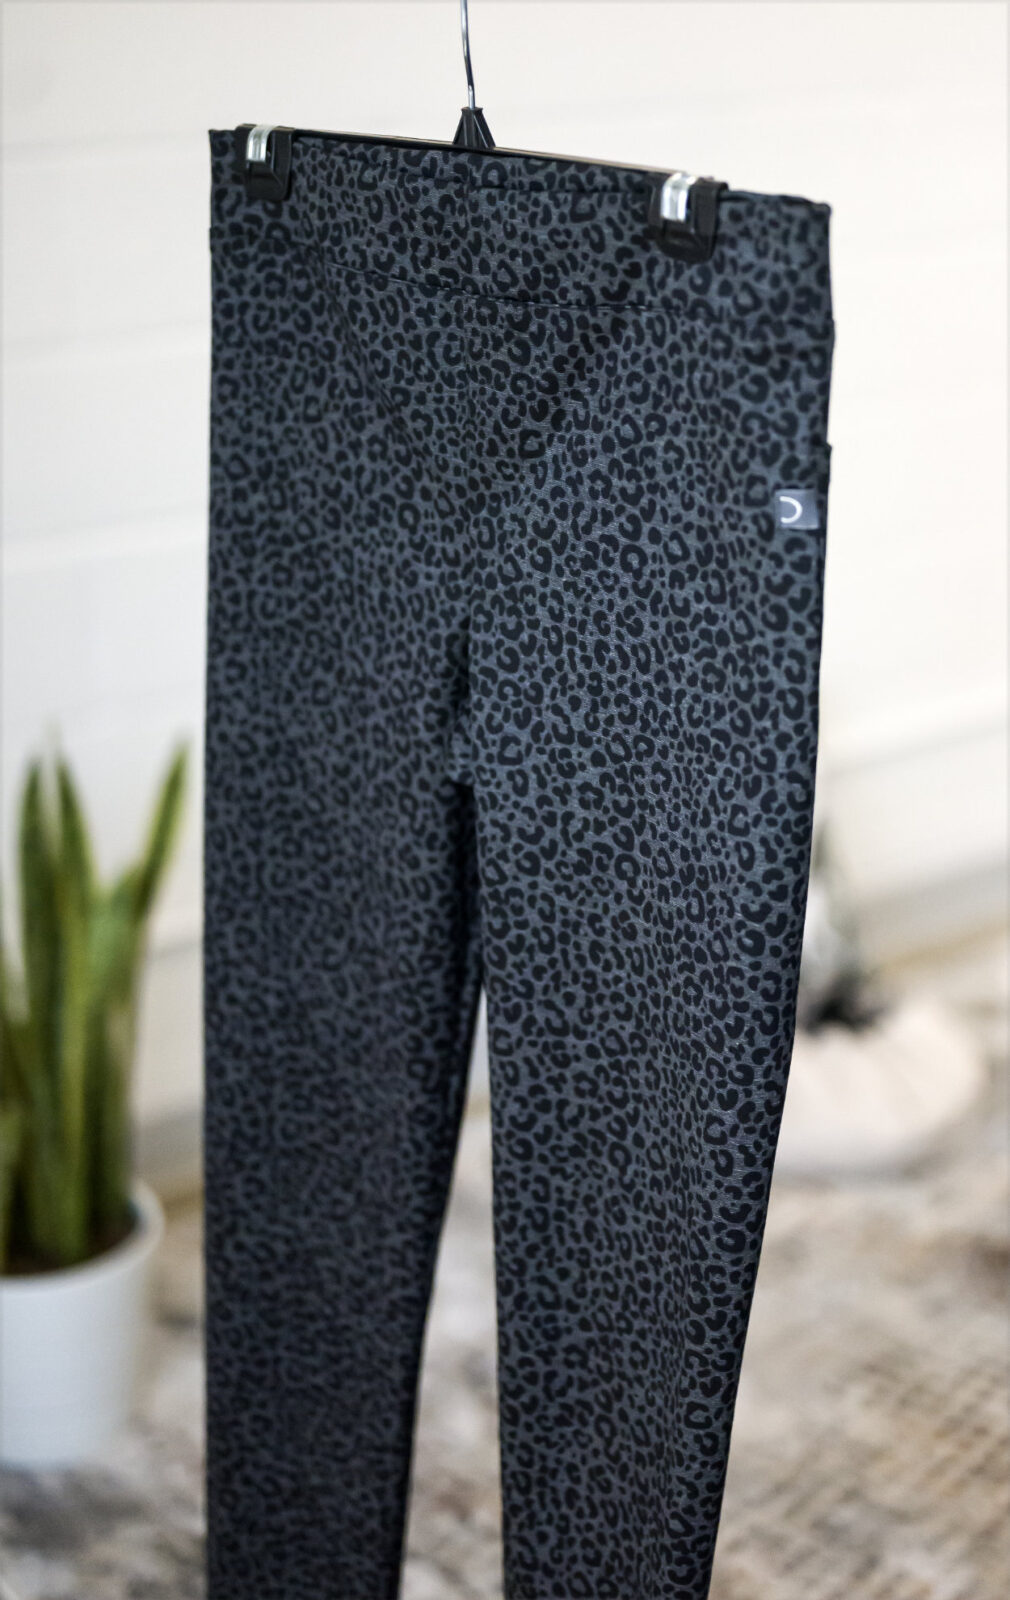 Delice Pants by Marie, Leopard, pull-on, slim fit, Ponte di Roma fabric, rear pockets, sizes XS to XL, made in Quebec